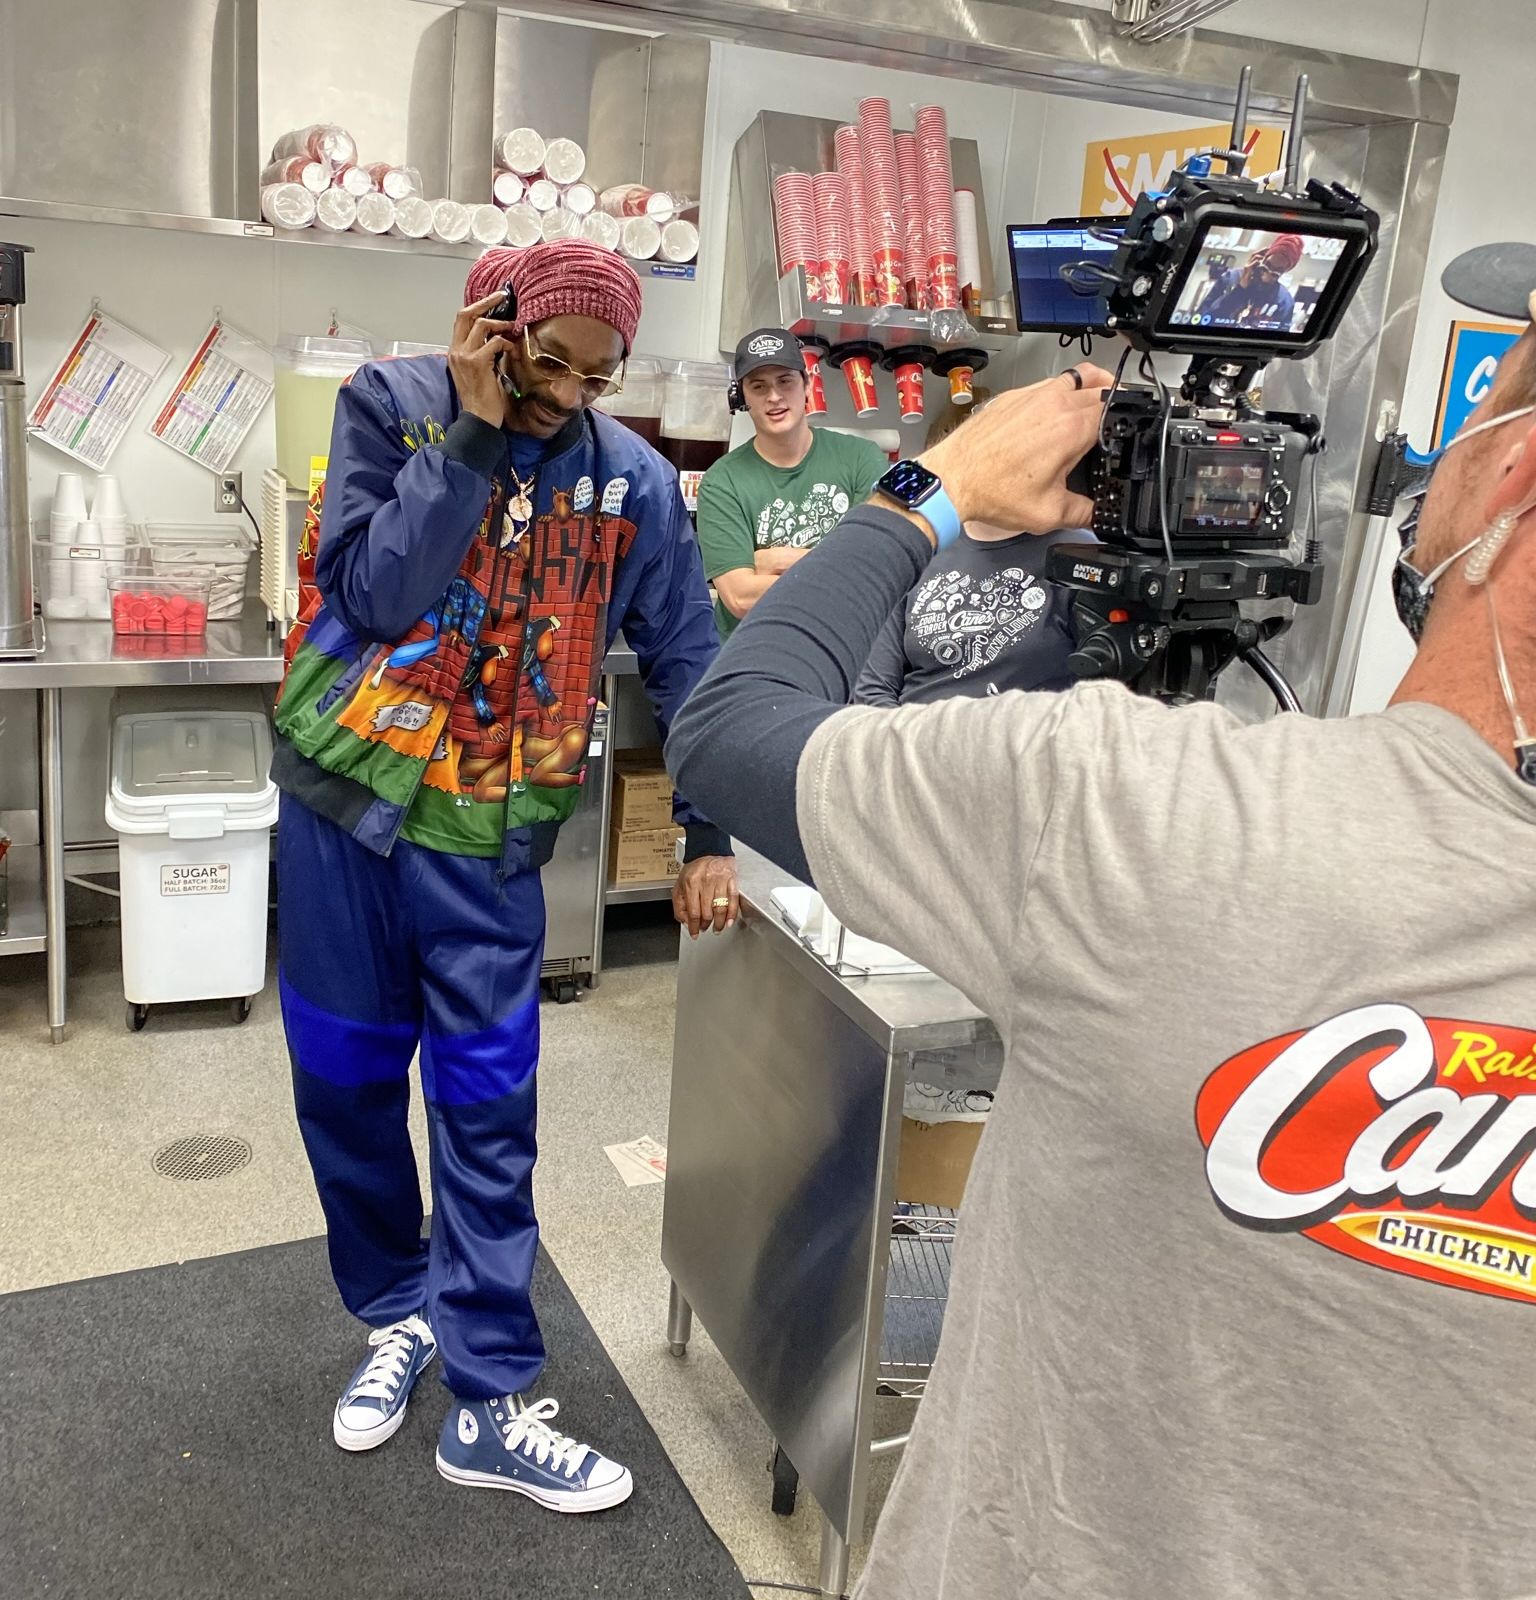 Snoop Dogg Surprises Raising Cane's Customers in the Drive-Thru